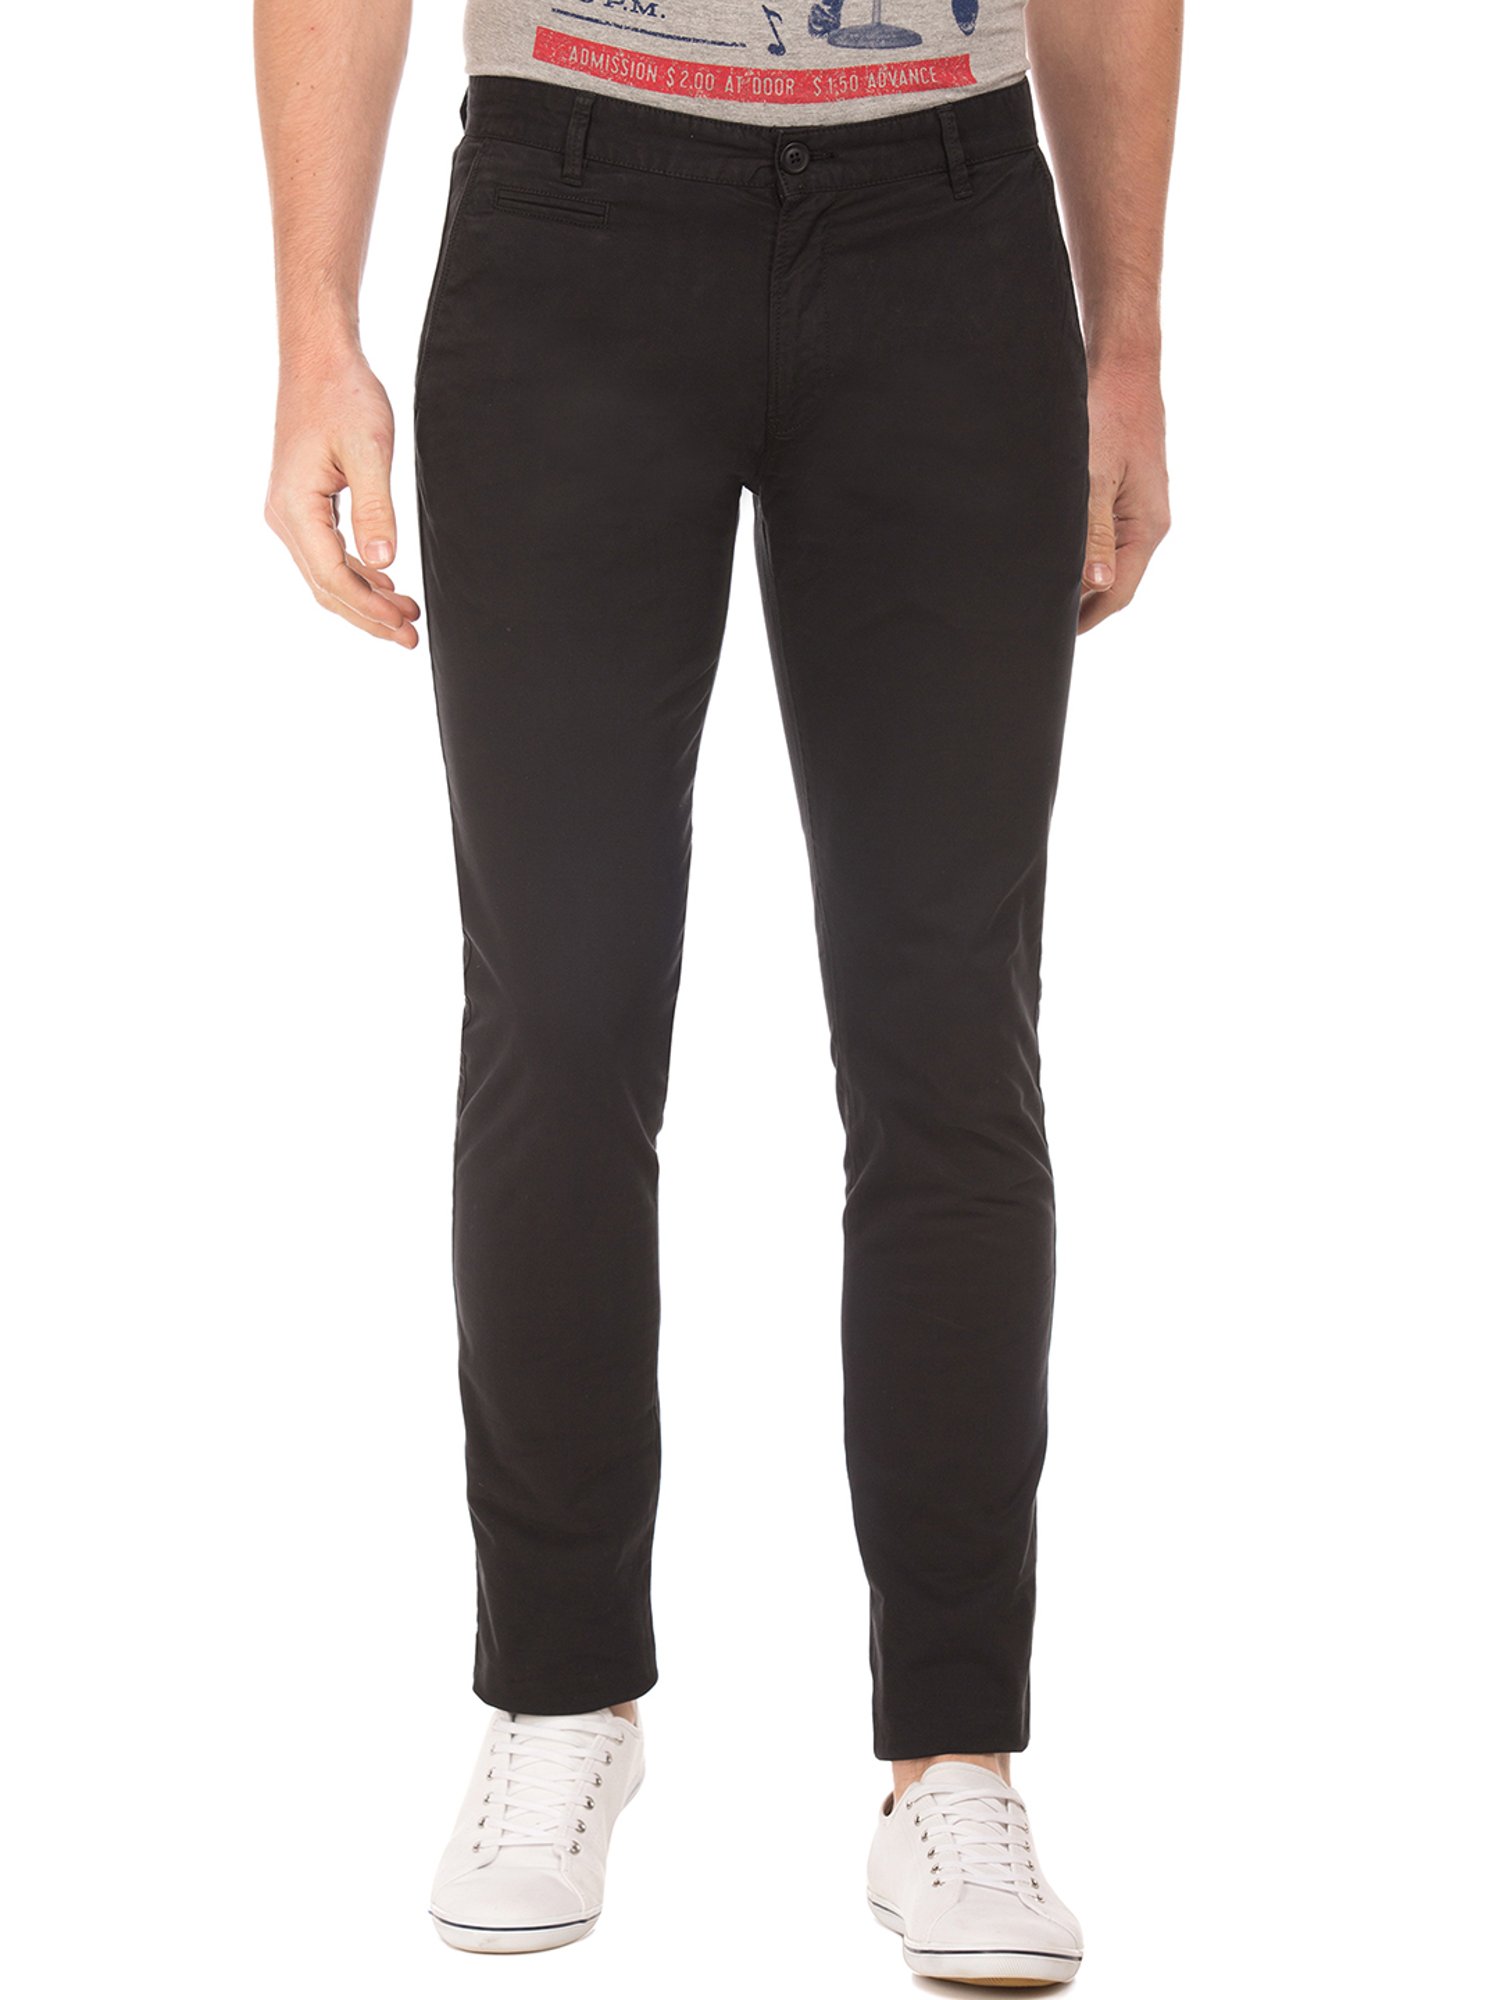 Blue Ultra High Rise Skinny Trousers Online Shopping  OXXOSHOP